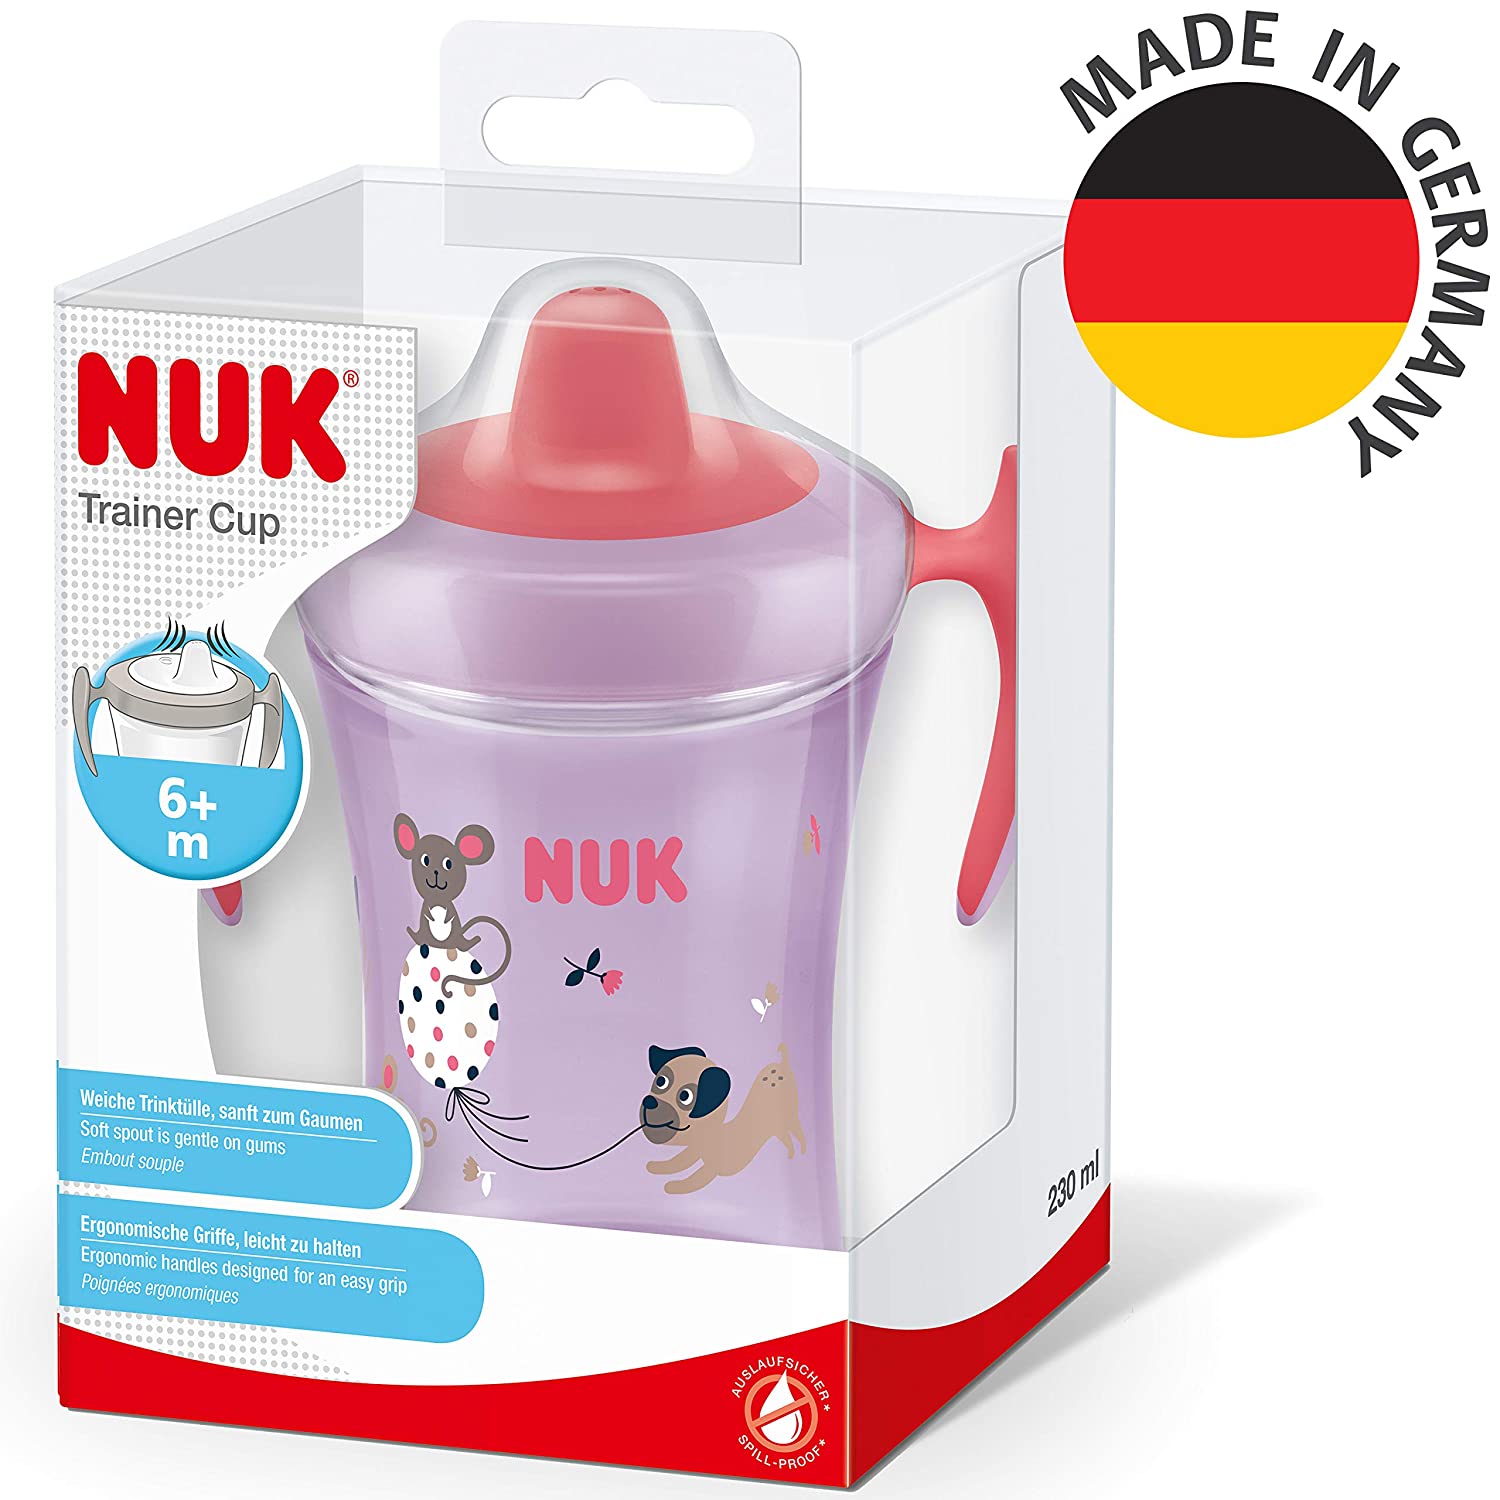 NUK Trainer Cup Drinking Cup, Soft Spout, Leak-Proof, 6+ Months, BPA-Free, 230 ml, Dog and Mouse, Purple.